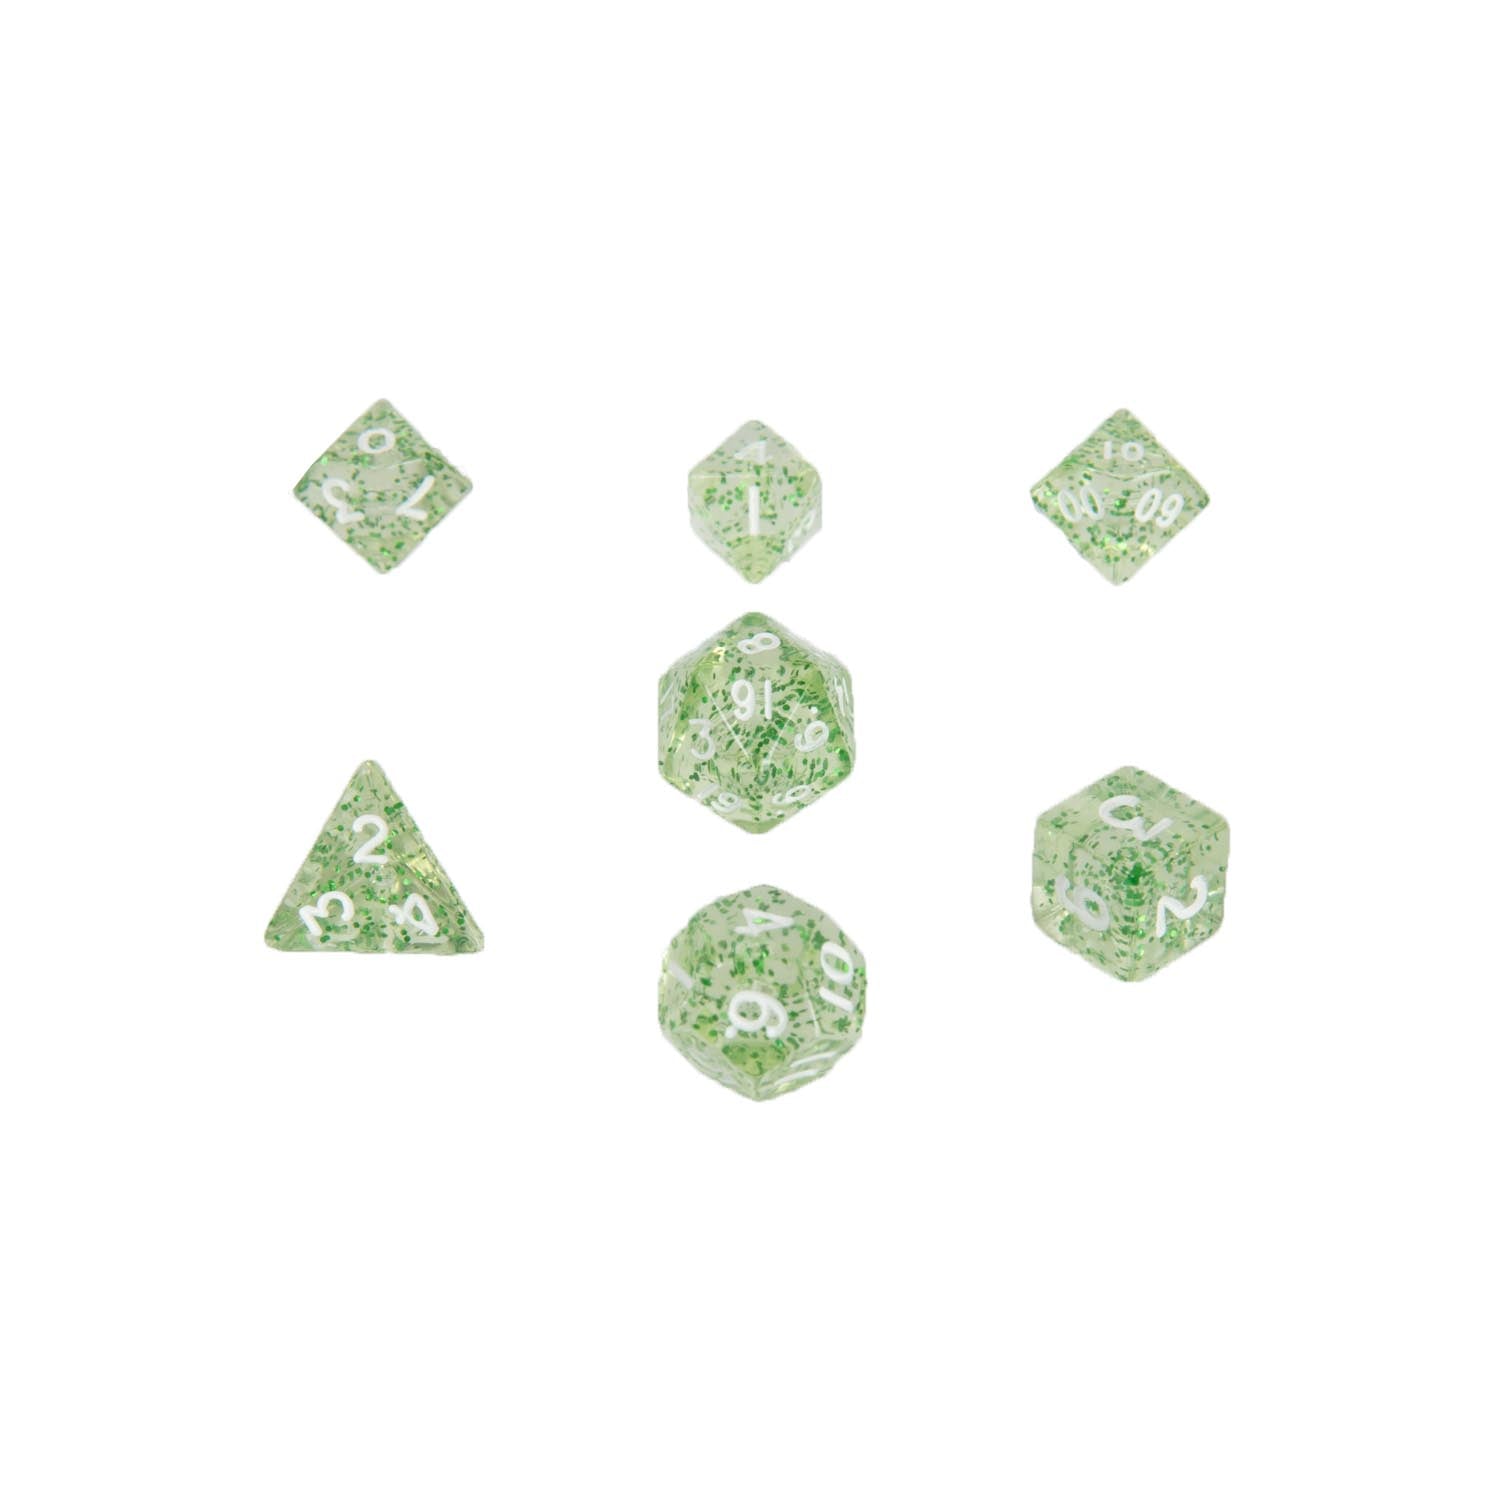 MDG 4205 Ethereal Green w/ White Mini Polyhedral Dice Set